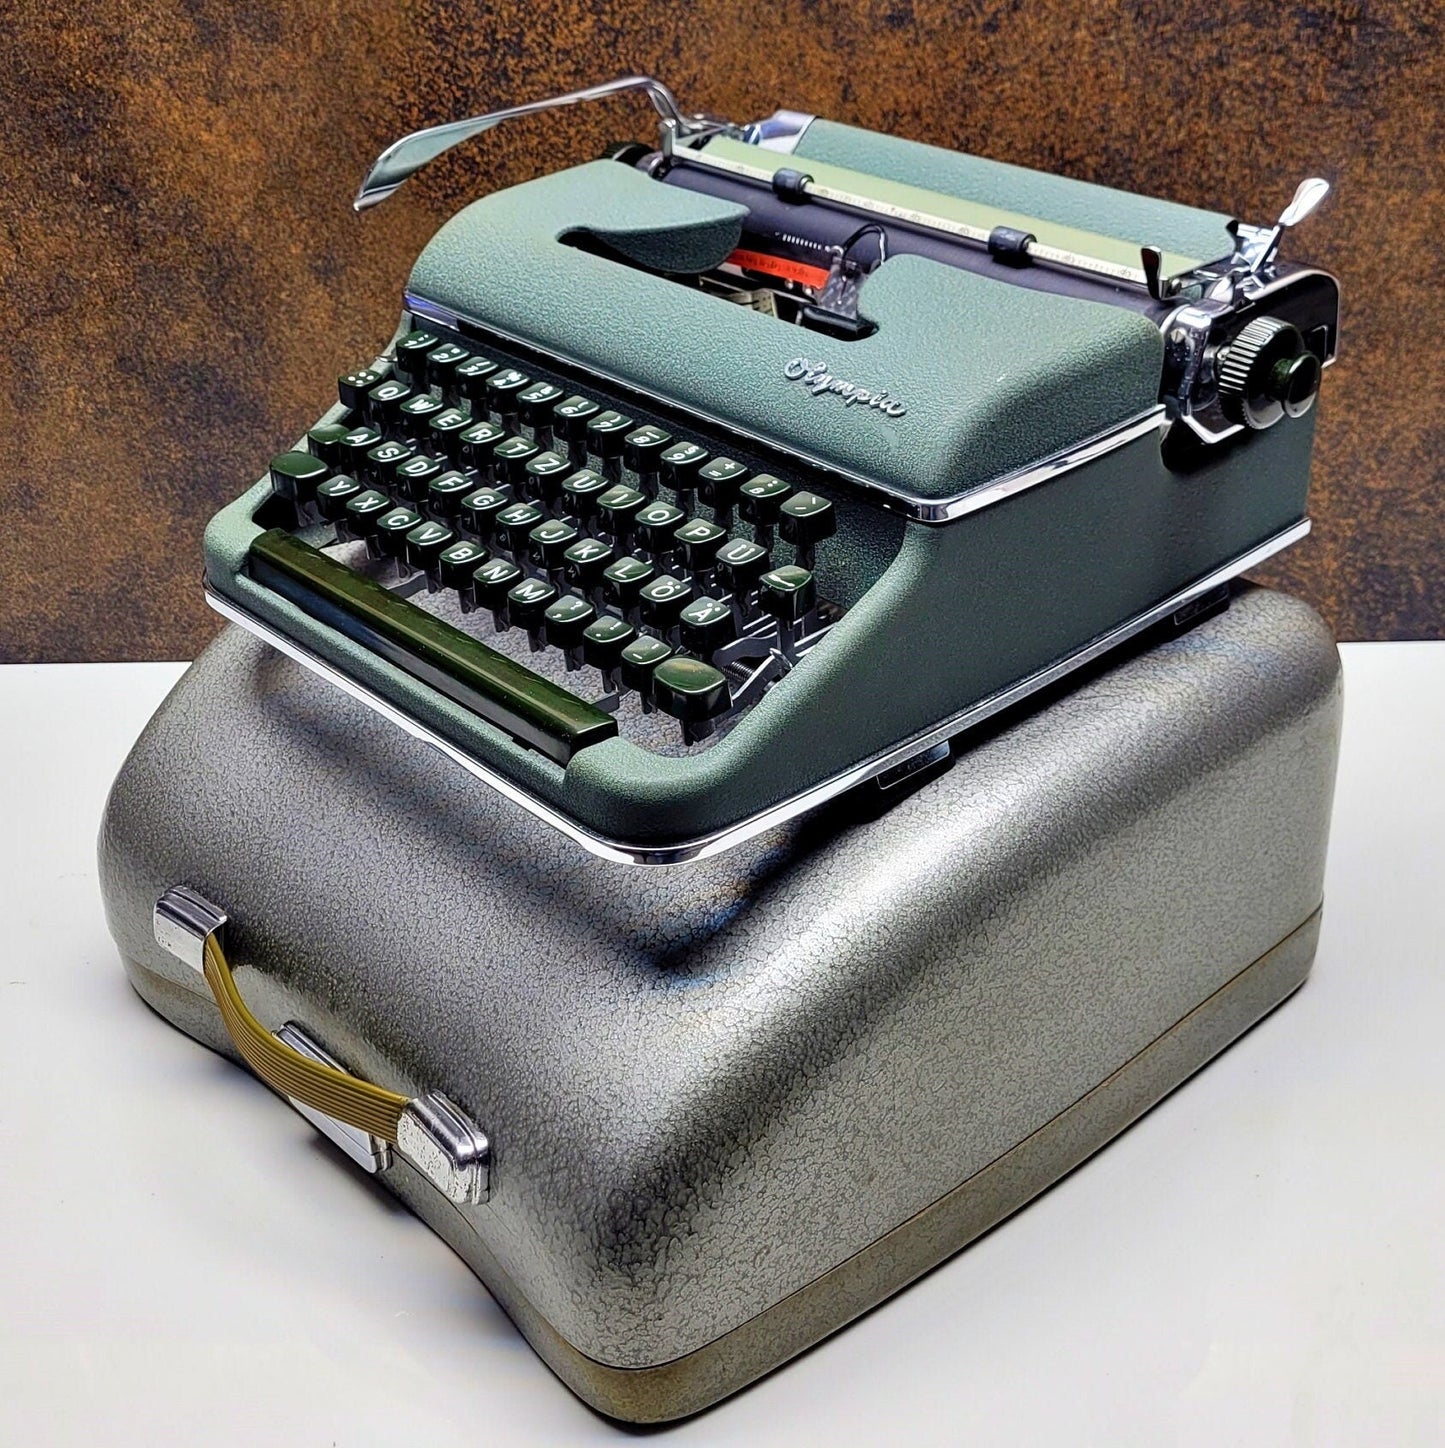 Vintage Olympia SM3 Typewriter - Fully Restored and Ready to Use,typewriter working